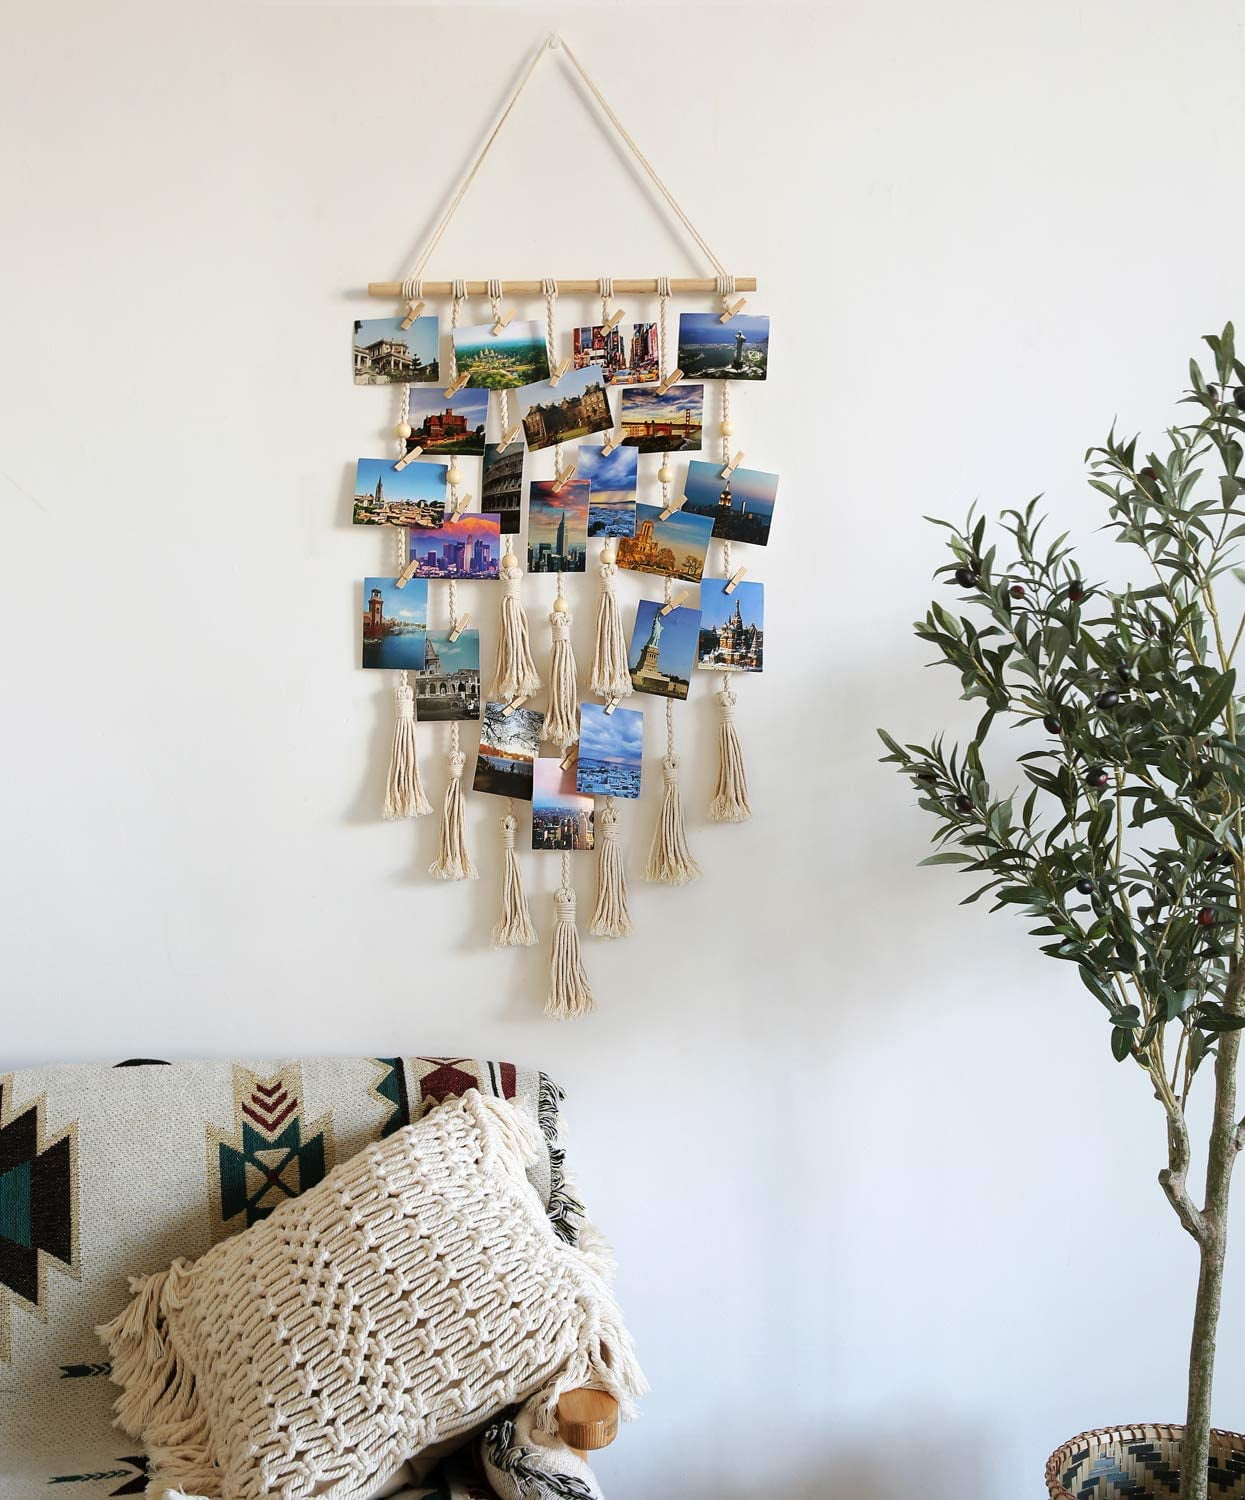 Ivory Hanging Photo Display Macrame Wall Hanging Pictures Organizer Boho Home Decor with 30 Wood Clips Birthday